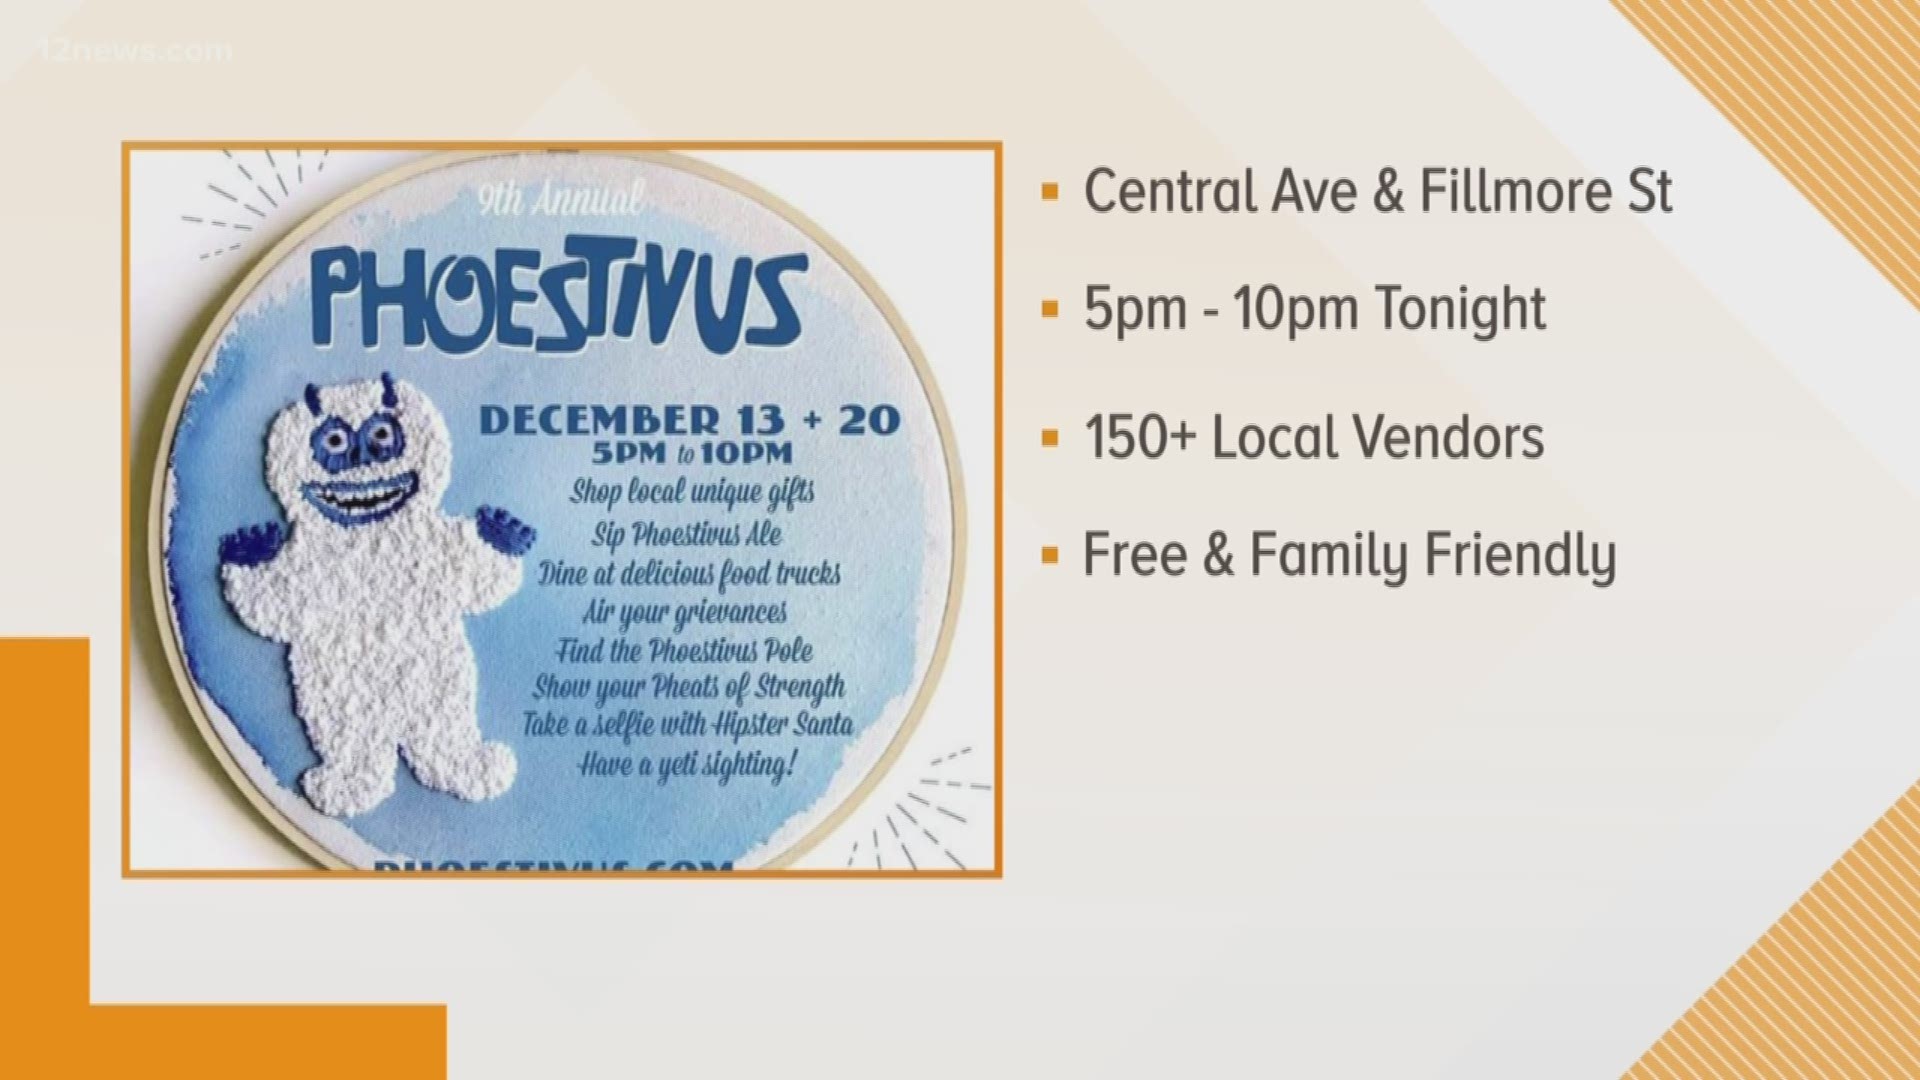 More than 150 local vendors in downtown Phoenix are here to save your holiday if you've procrastinated shopping.